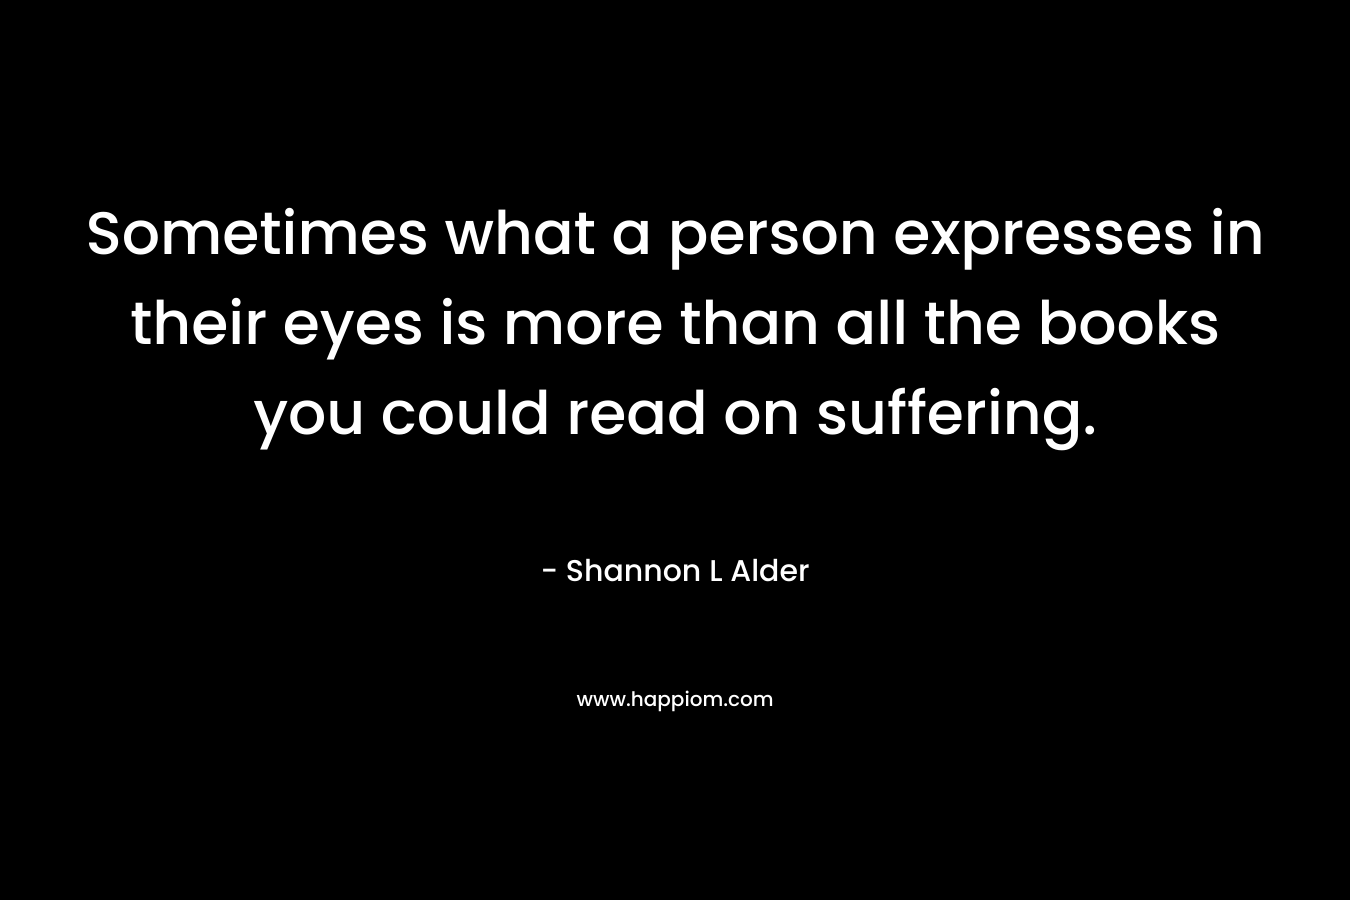 Sometimes what a person expresses in their eyes is more than all the books you could read on suffering. – Shannon L Alder